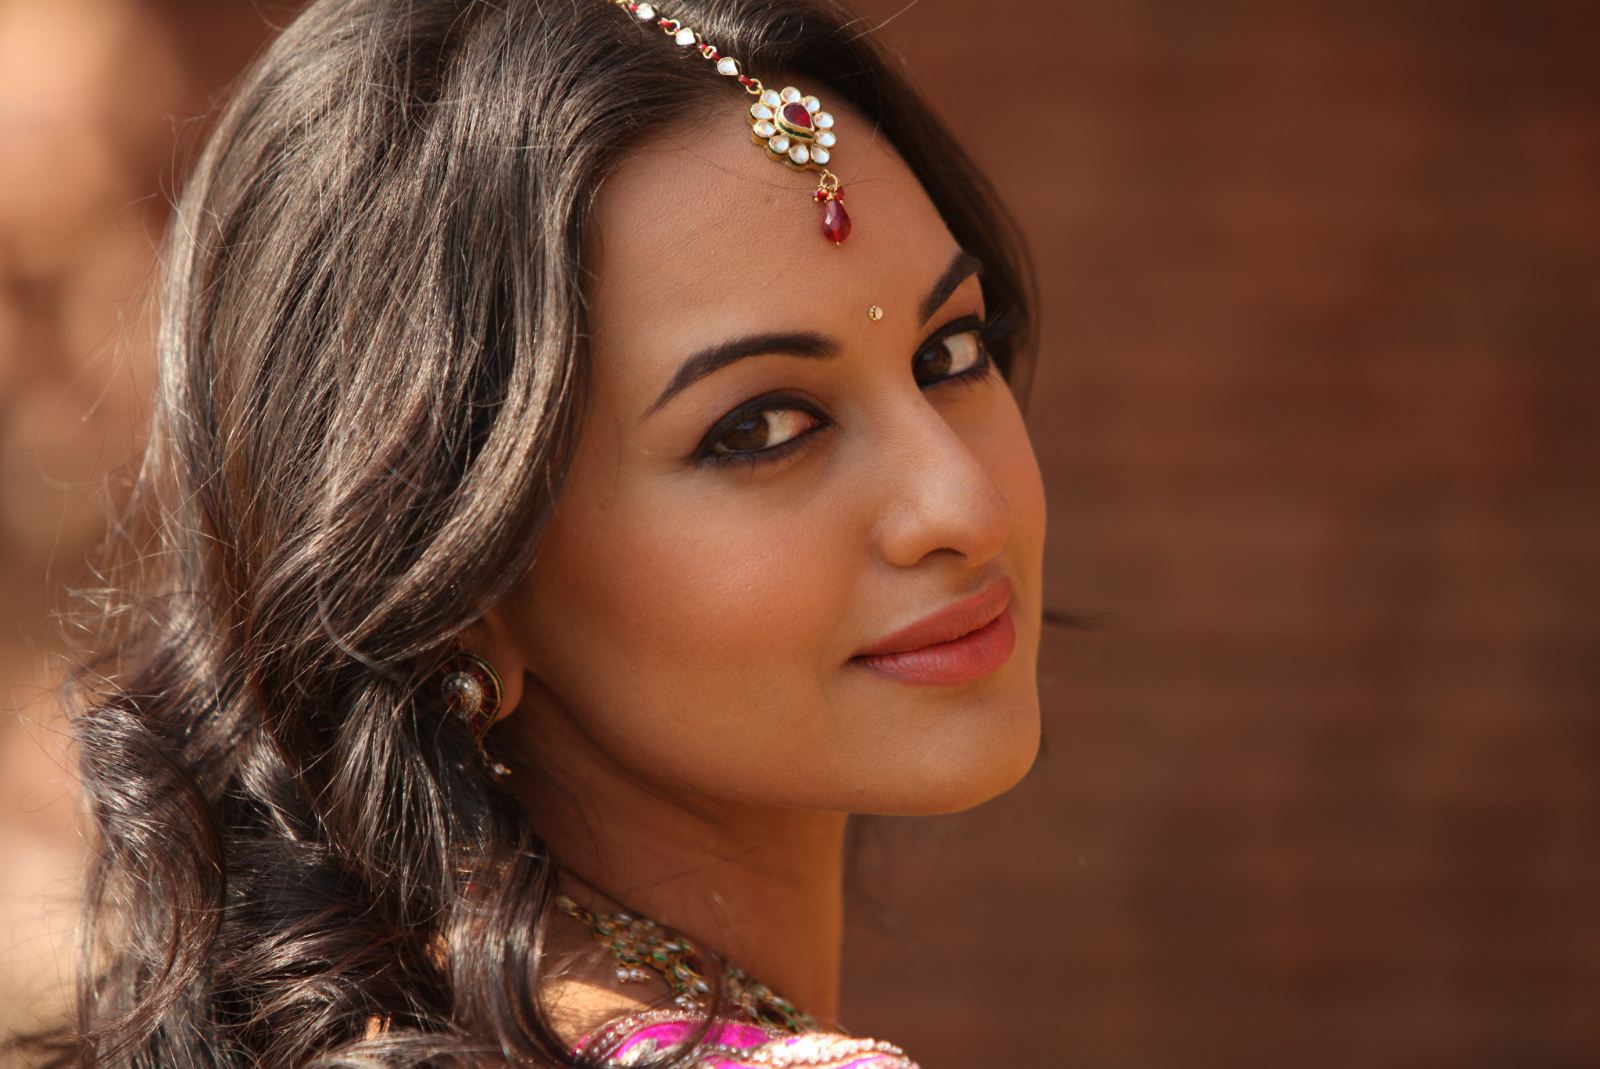 “I Don’t Choose A Film Because It Is Massy Or Classy” – Sonakshi Sinha